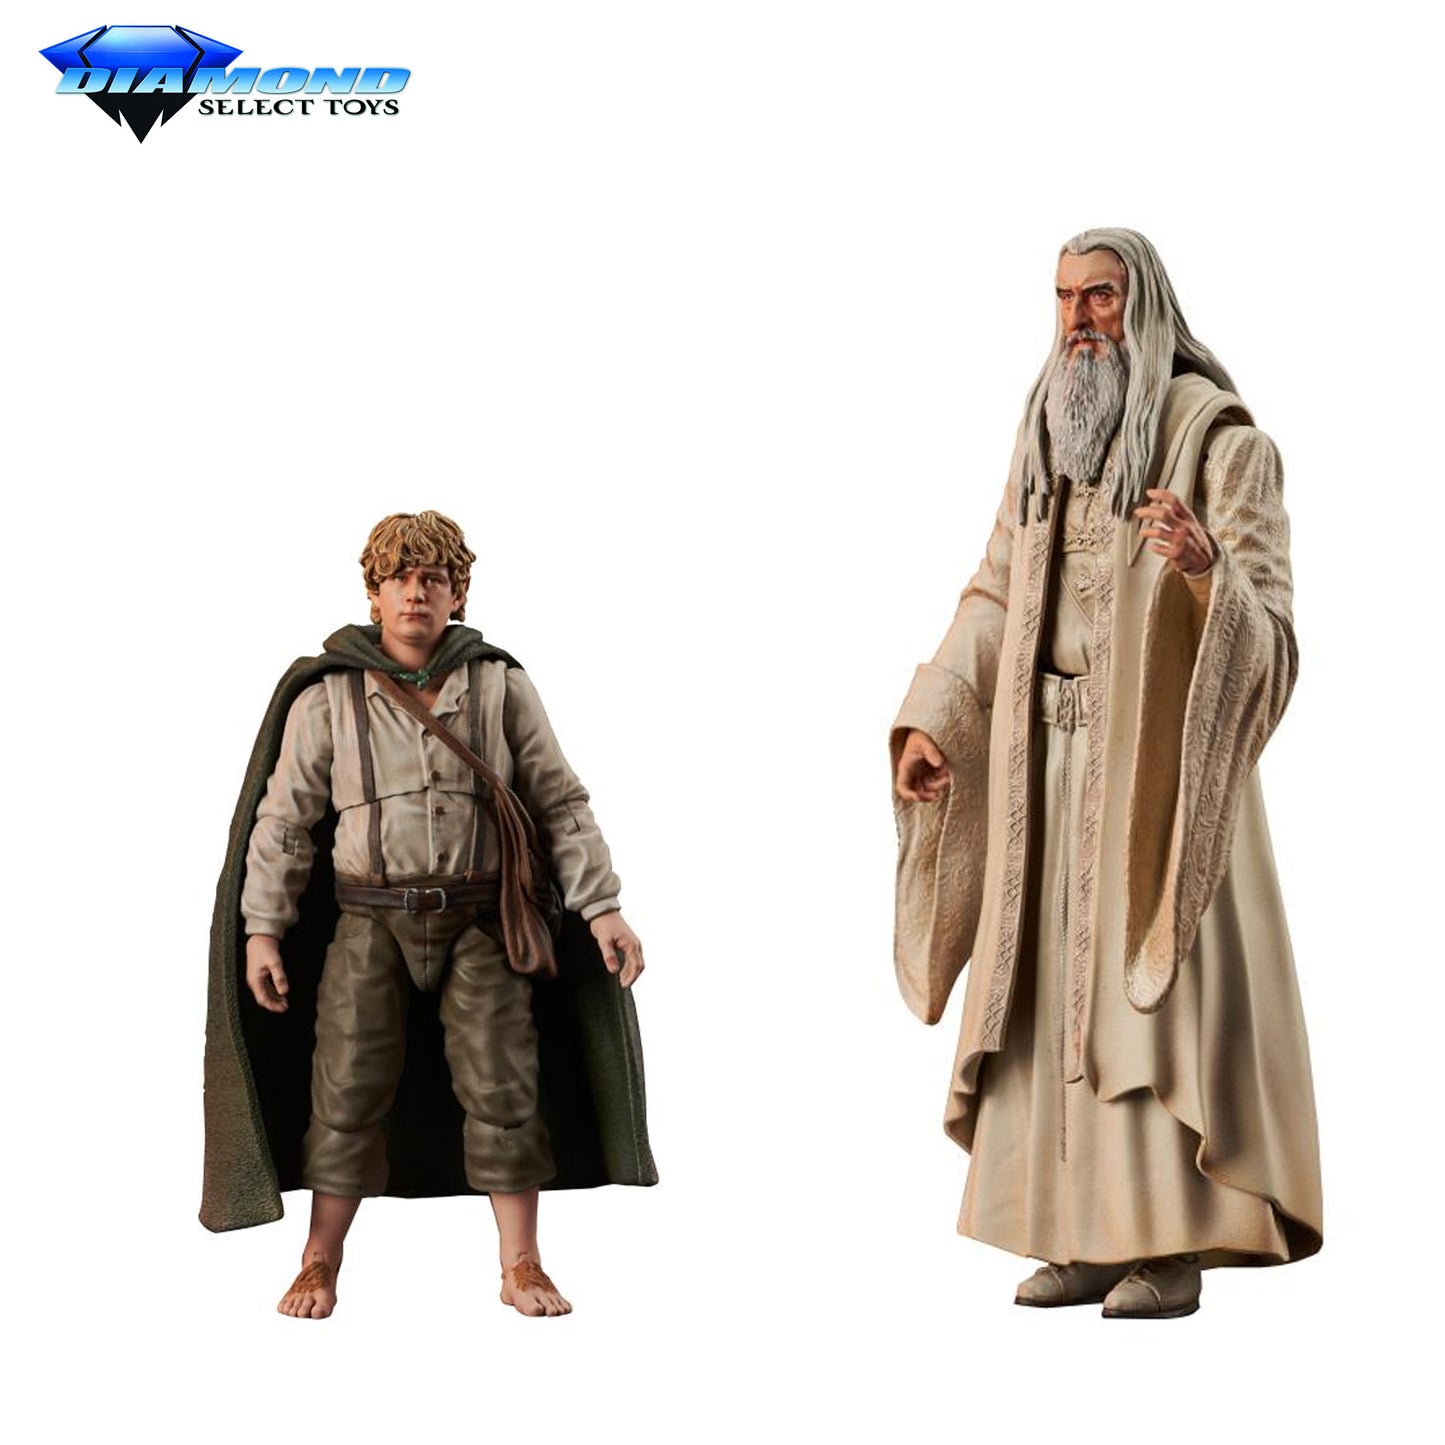 Lord of the Rings Deluxe Action Figure Series 6 (Samwise/Saruman)